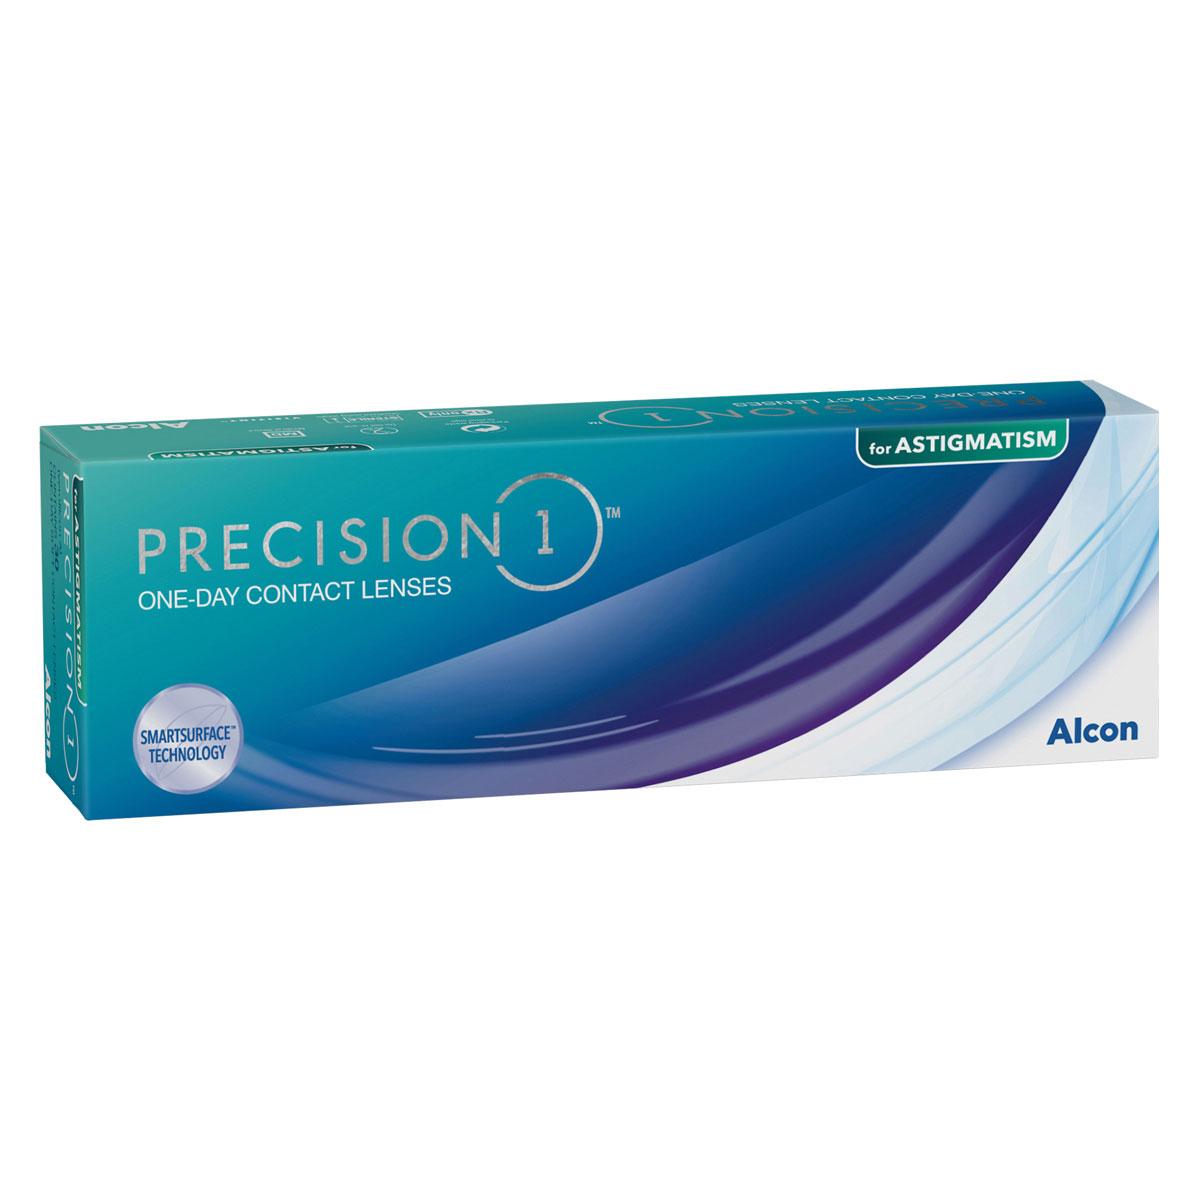 Precision 1 for Astigmatism (30 Contact Lenses), Alcon, Toric Daily Disposables, Silicone Hydrogel